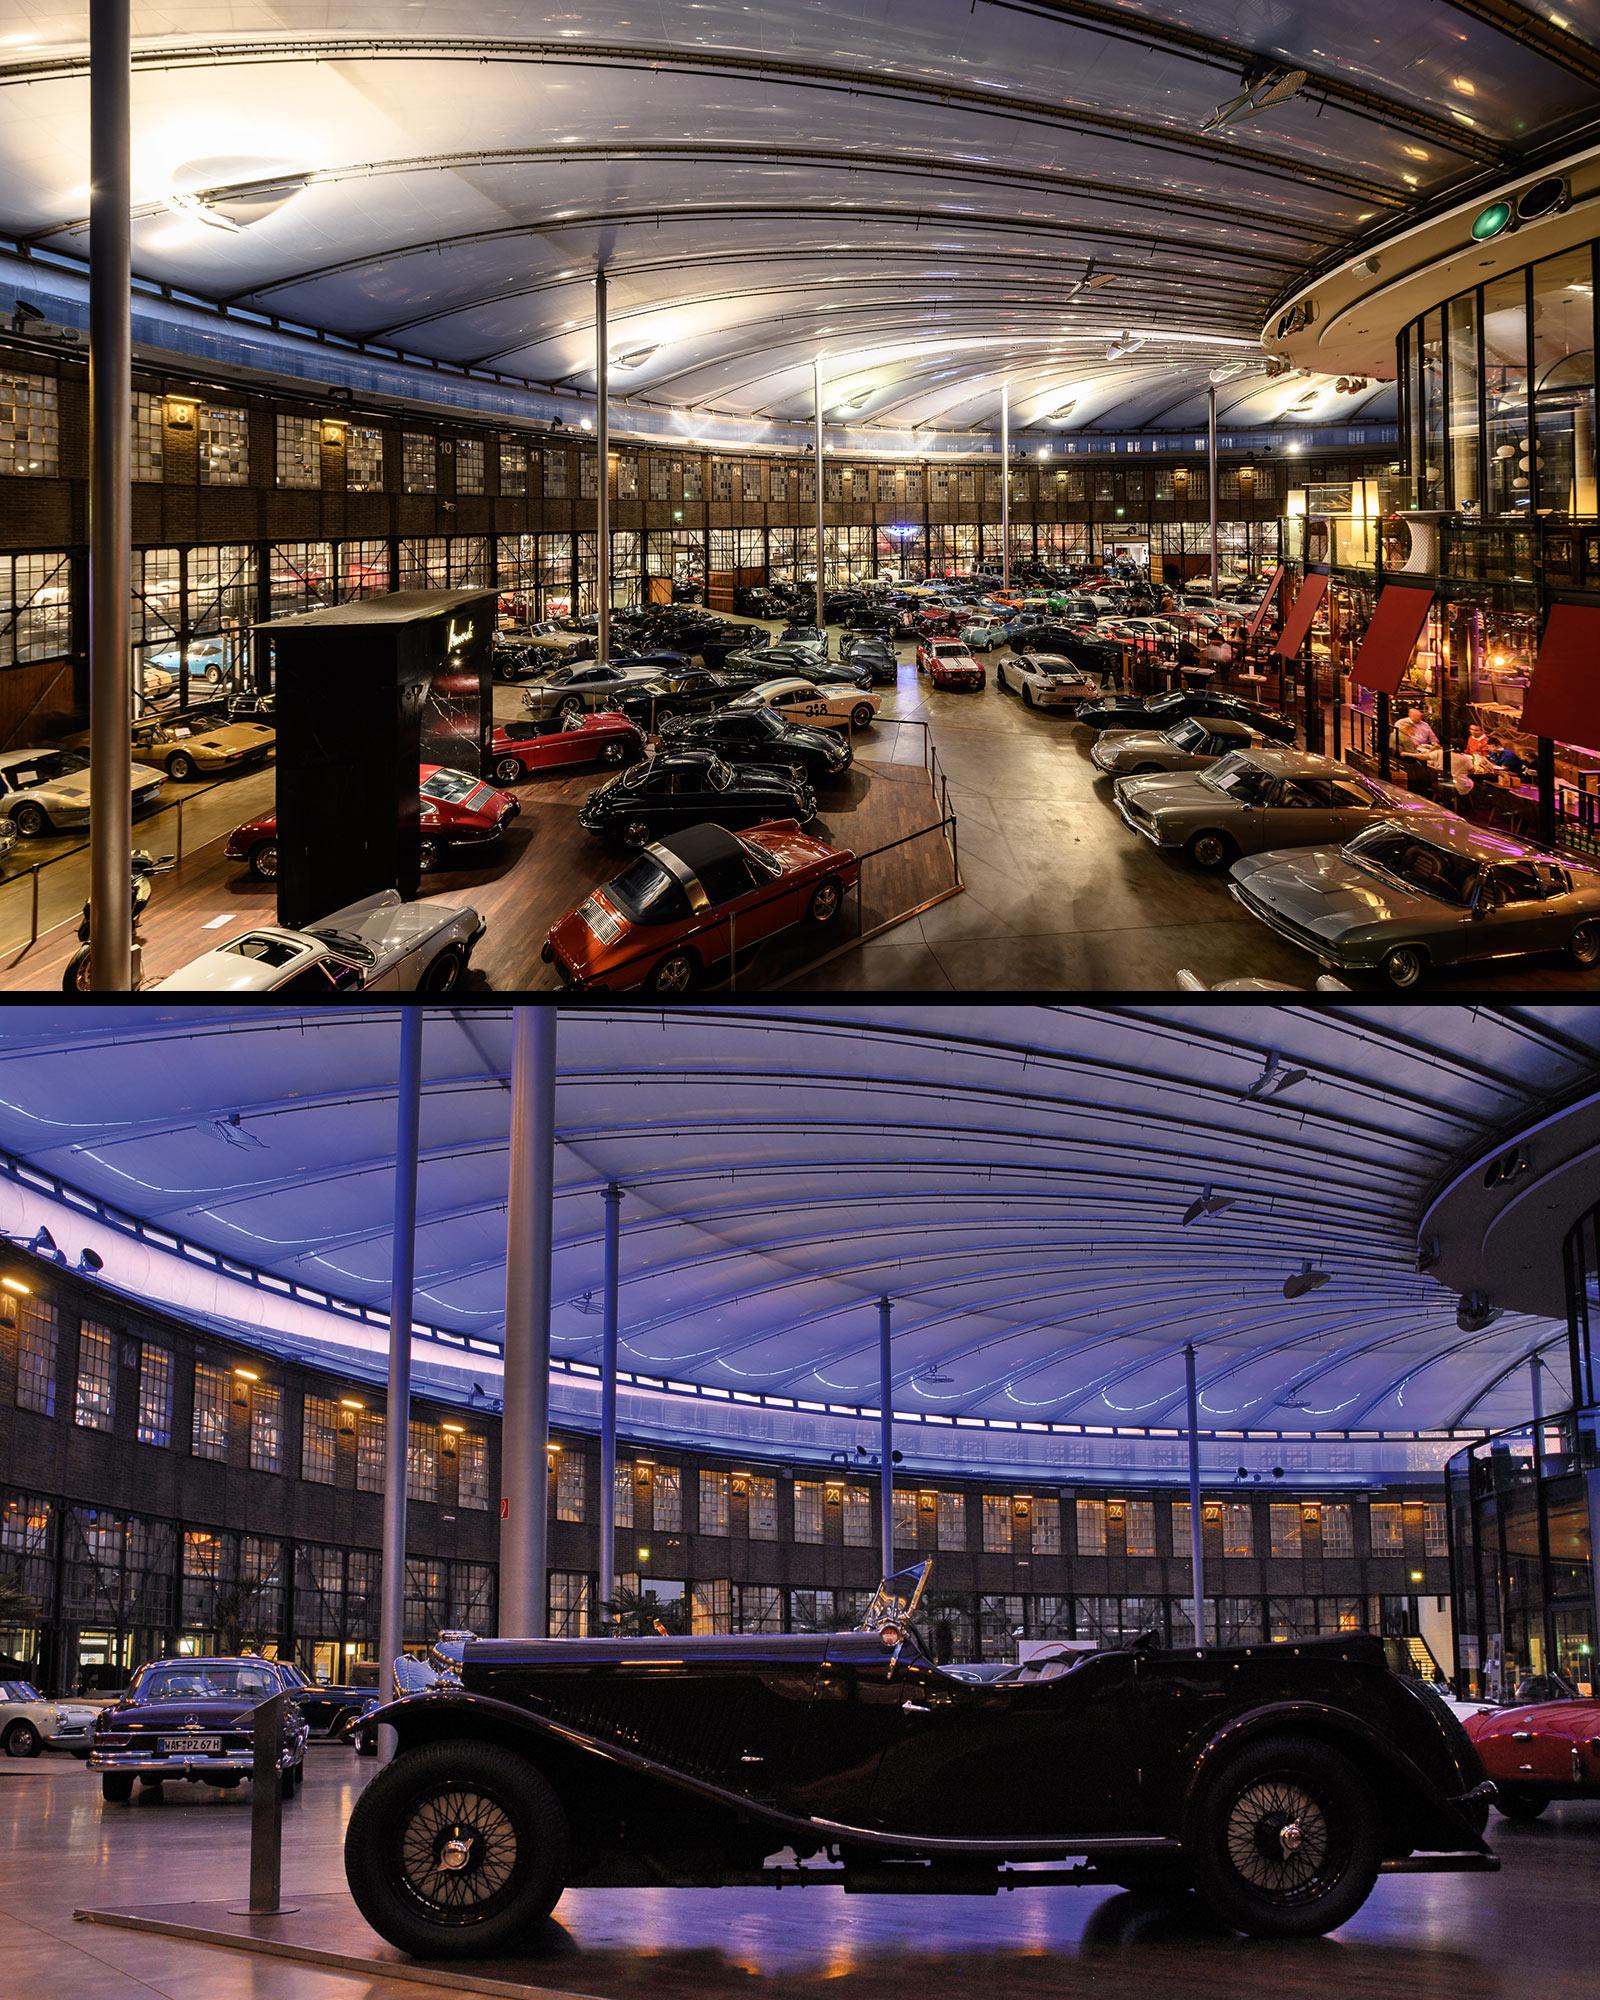 Classic-Remise-Old-Timer-Garage-Duesseldorf-Carousel